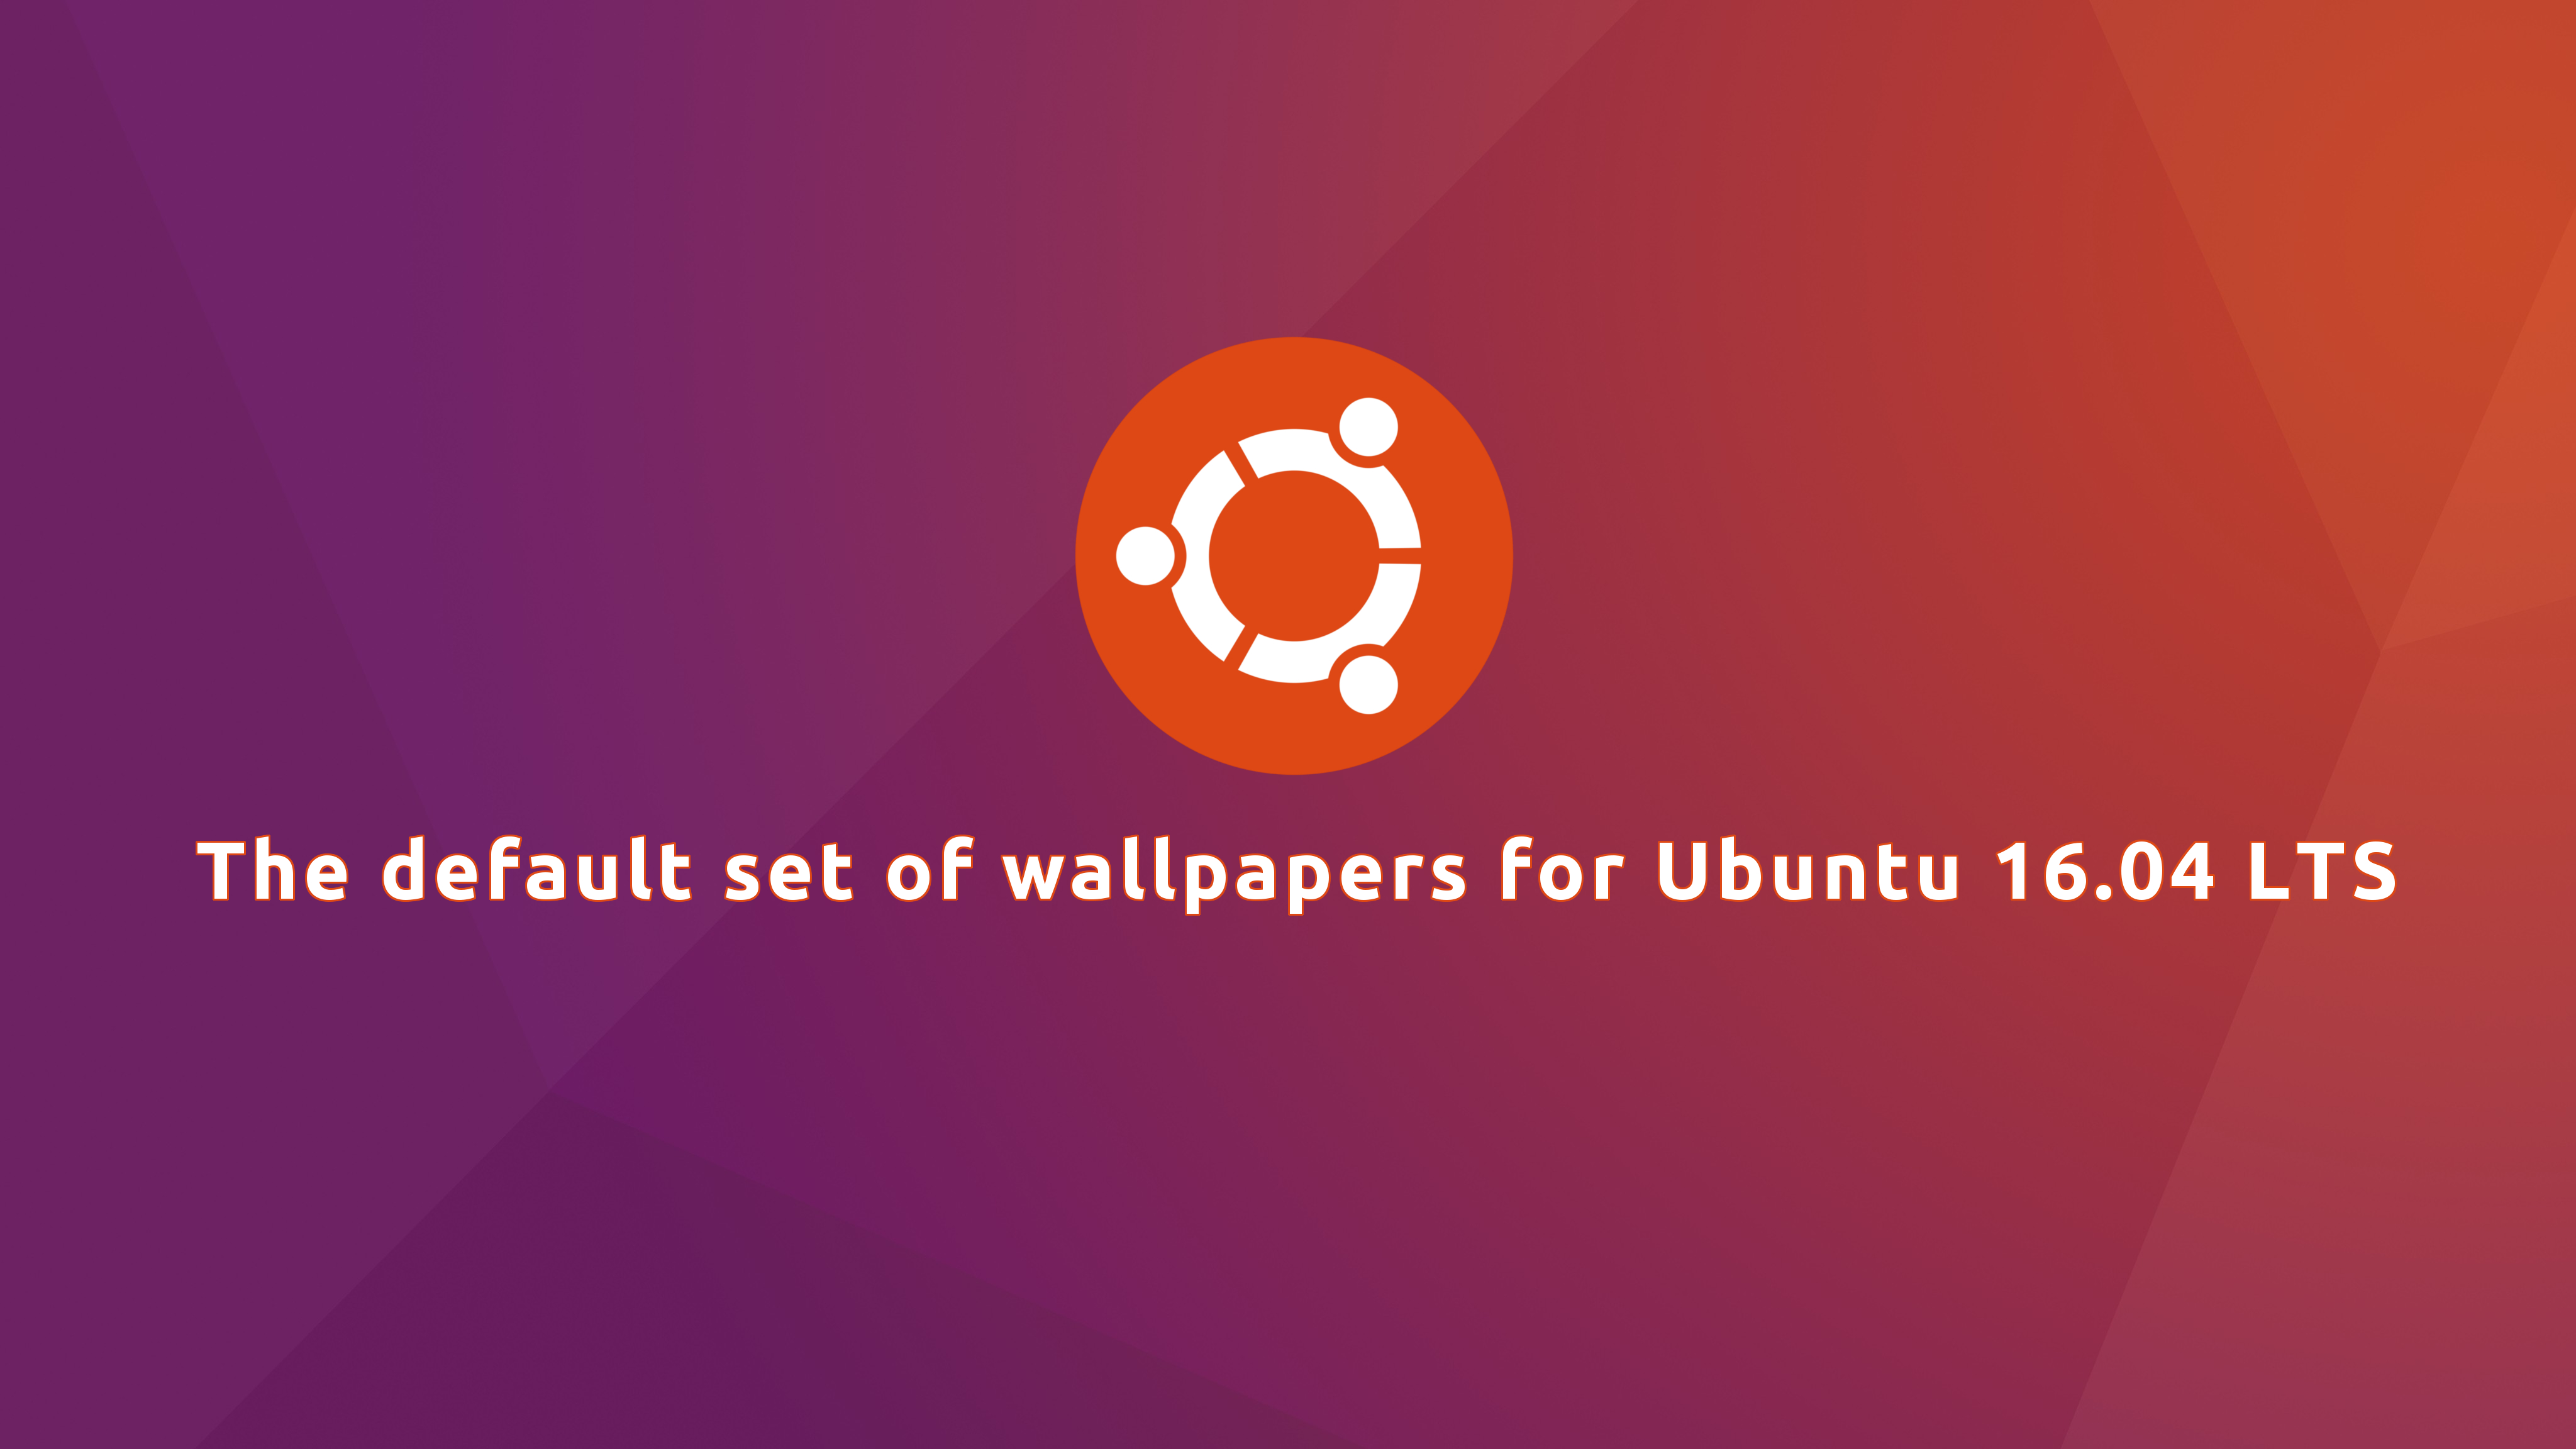 Here Is The Default Set Of Wallpaper For Ubuntu Lts